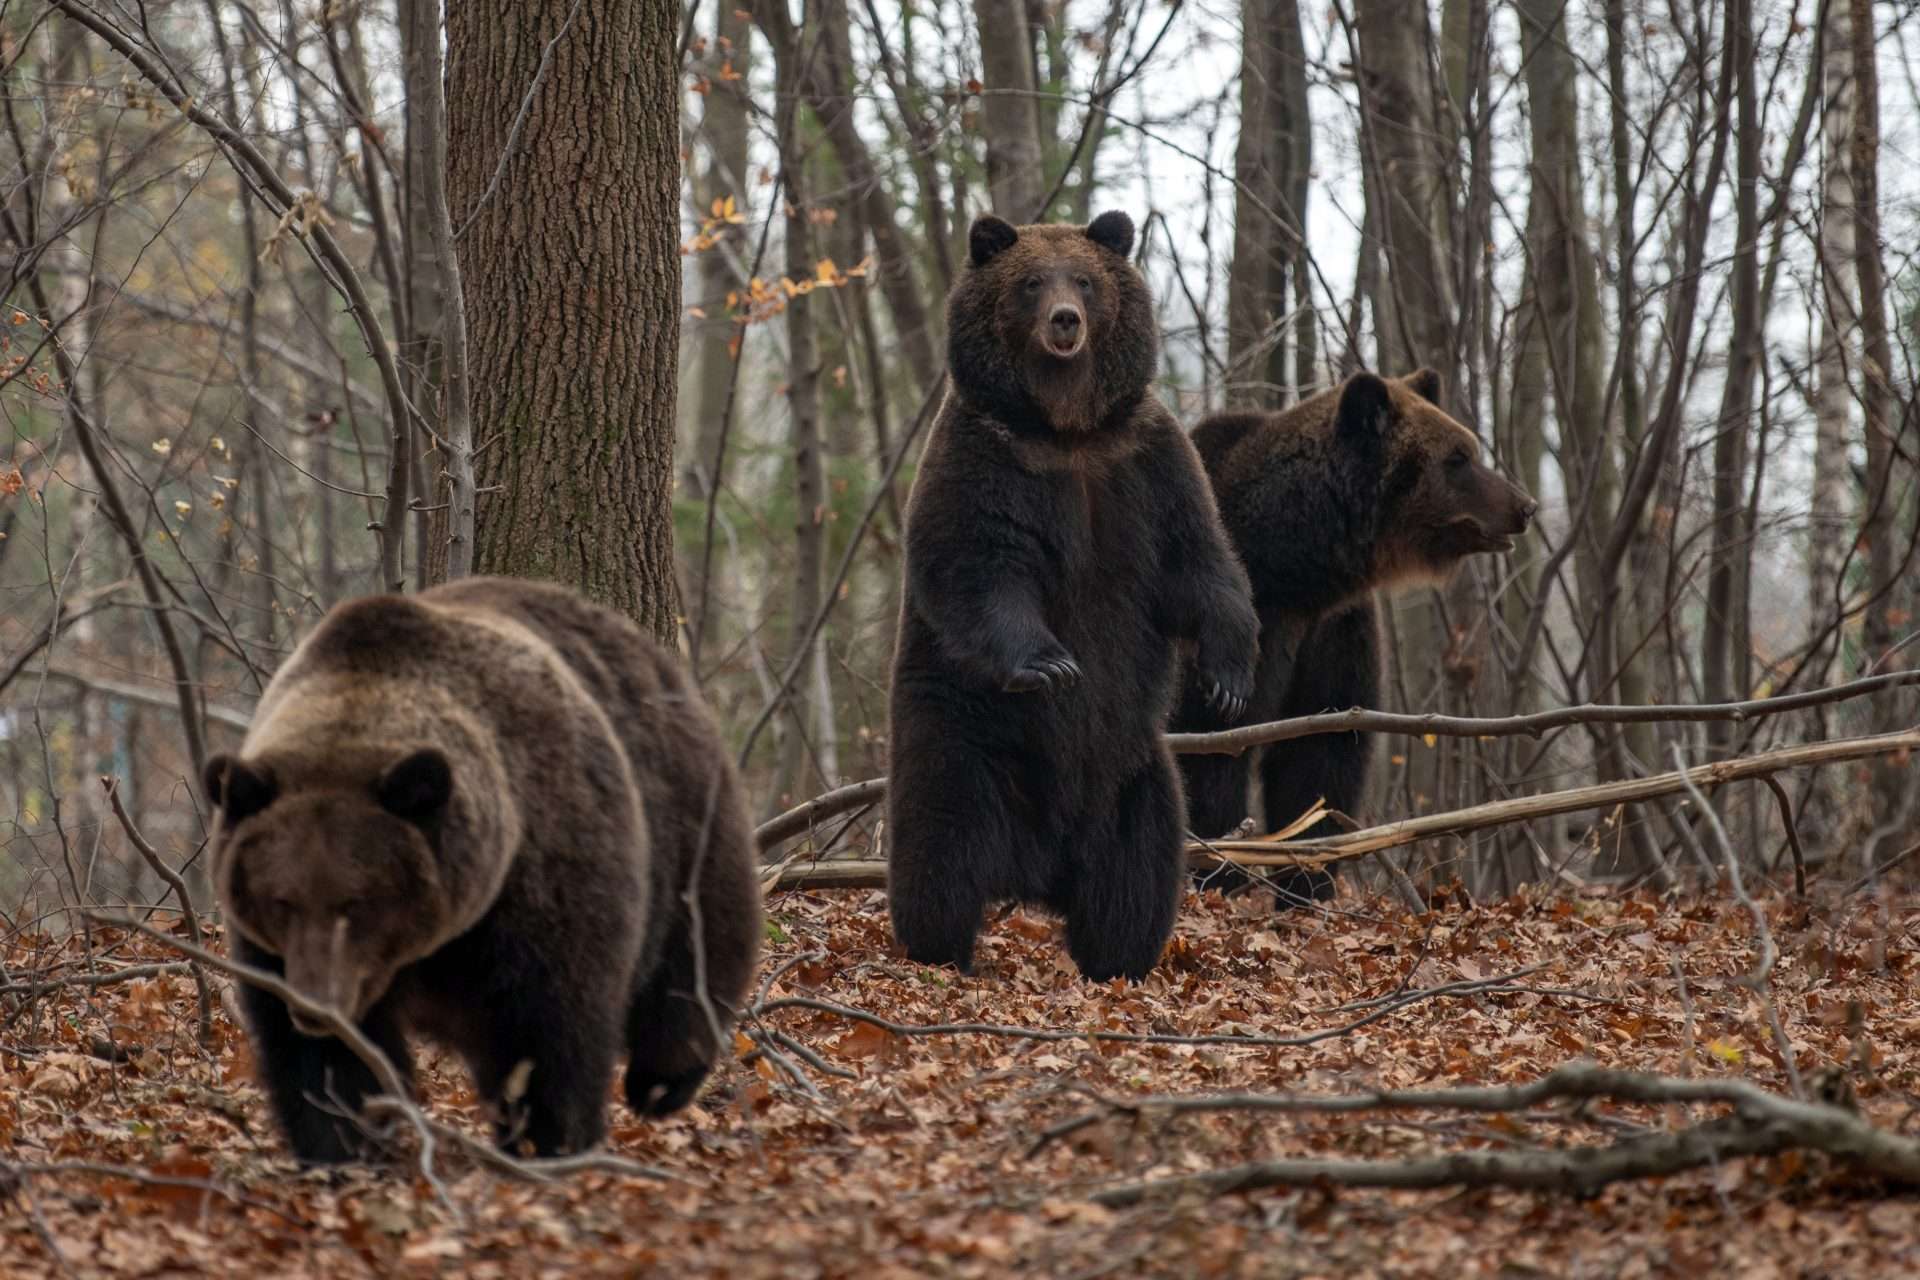 Bears looking for food in the woods.